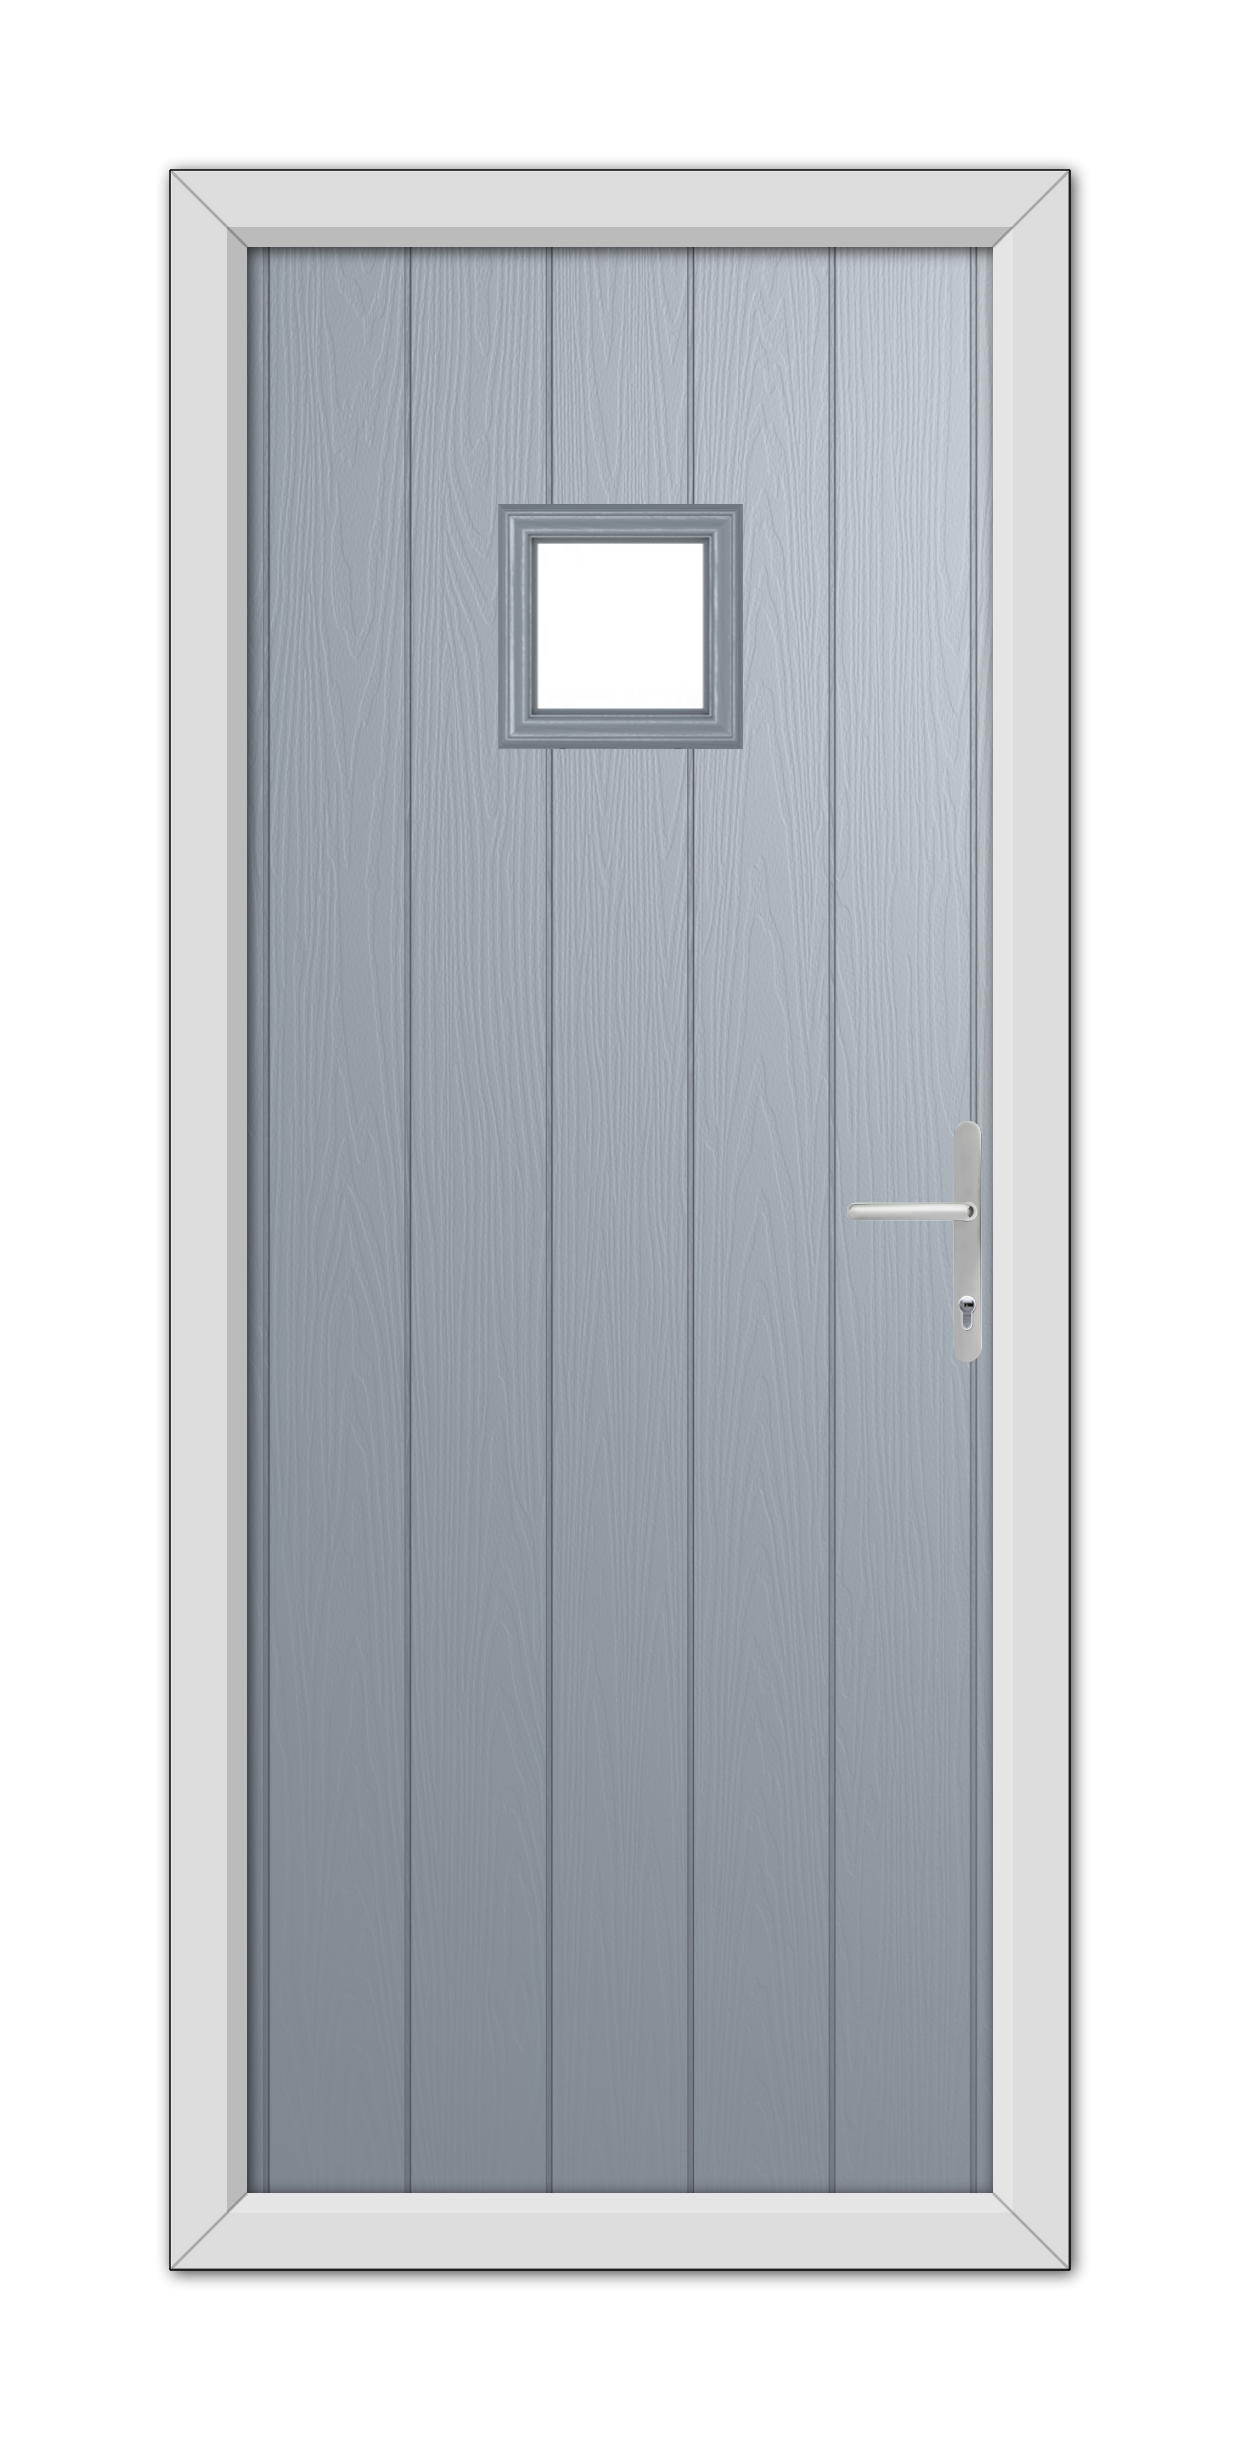 A French Grey Brampton Composite Door 48mm Timber Core featuring vertical panels, a small square window, and a metallic handle, set within a white door frame.